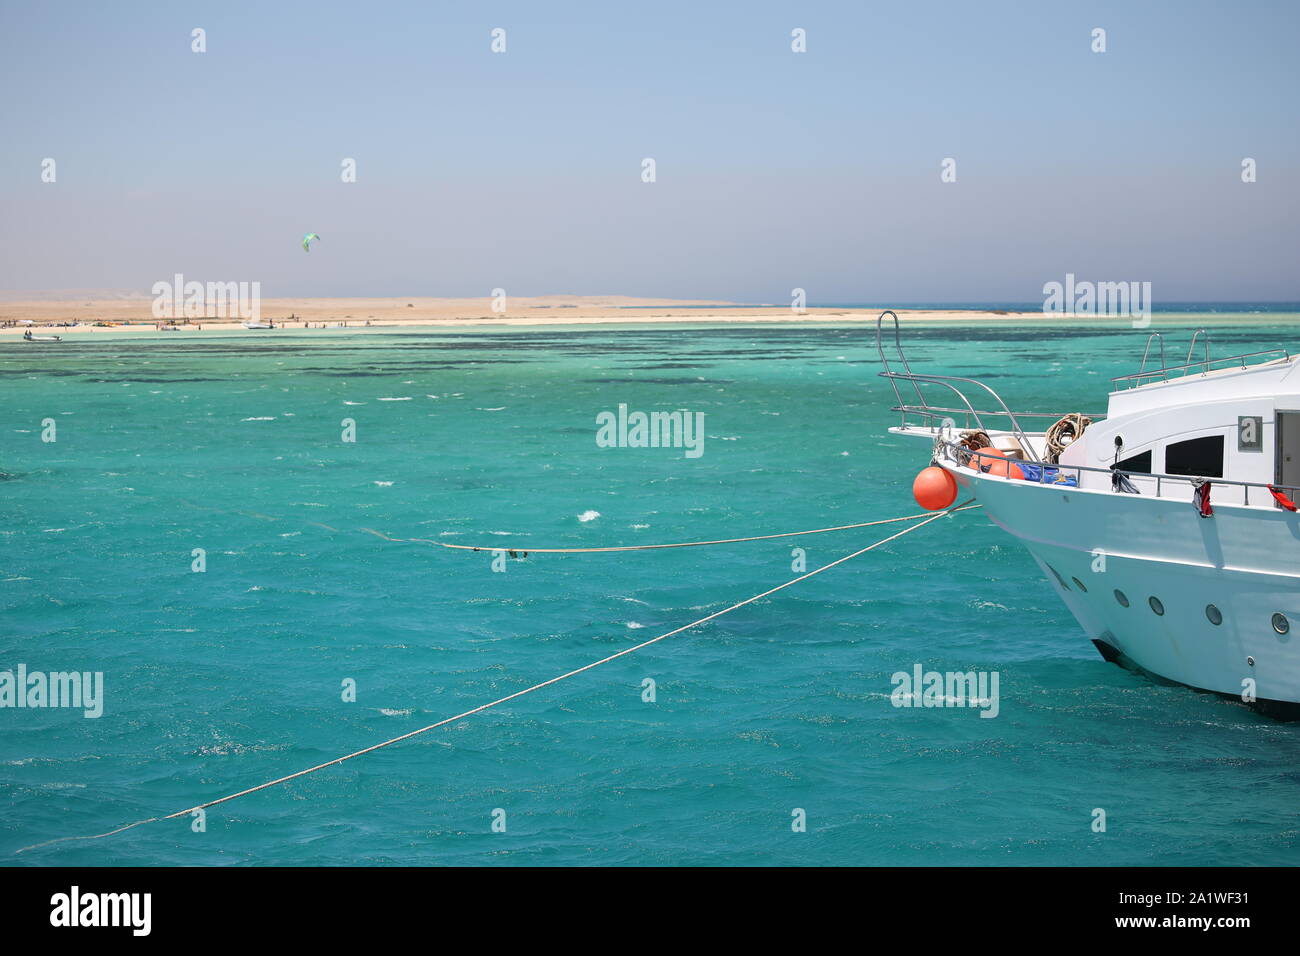 Motor yacht anchored of a deserted island in the Red Sea with kitesurfing in the background Stock Photo